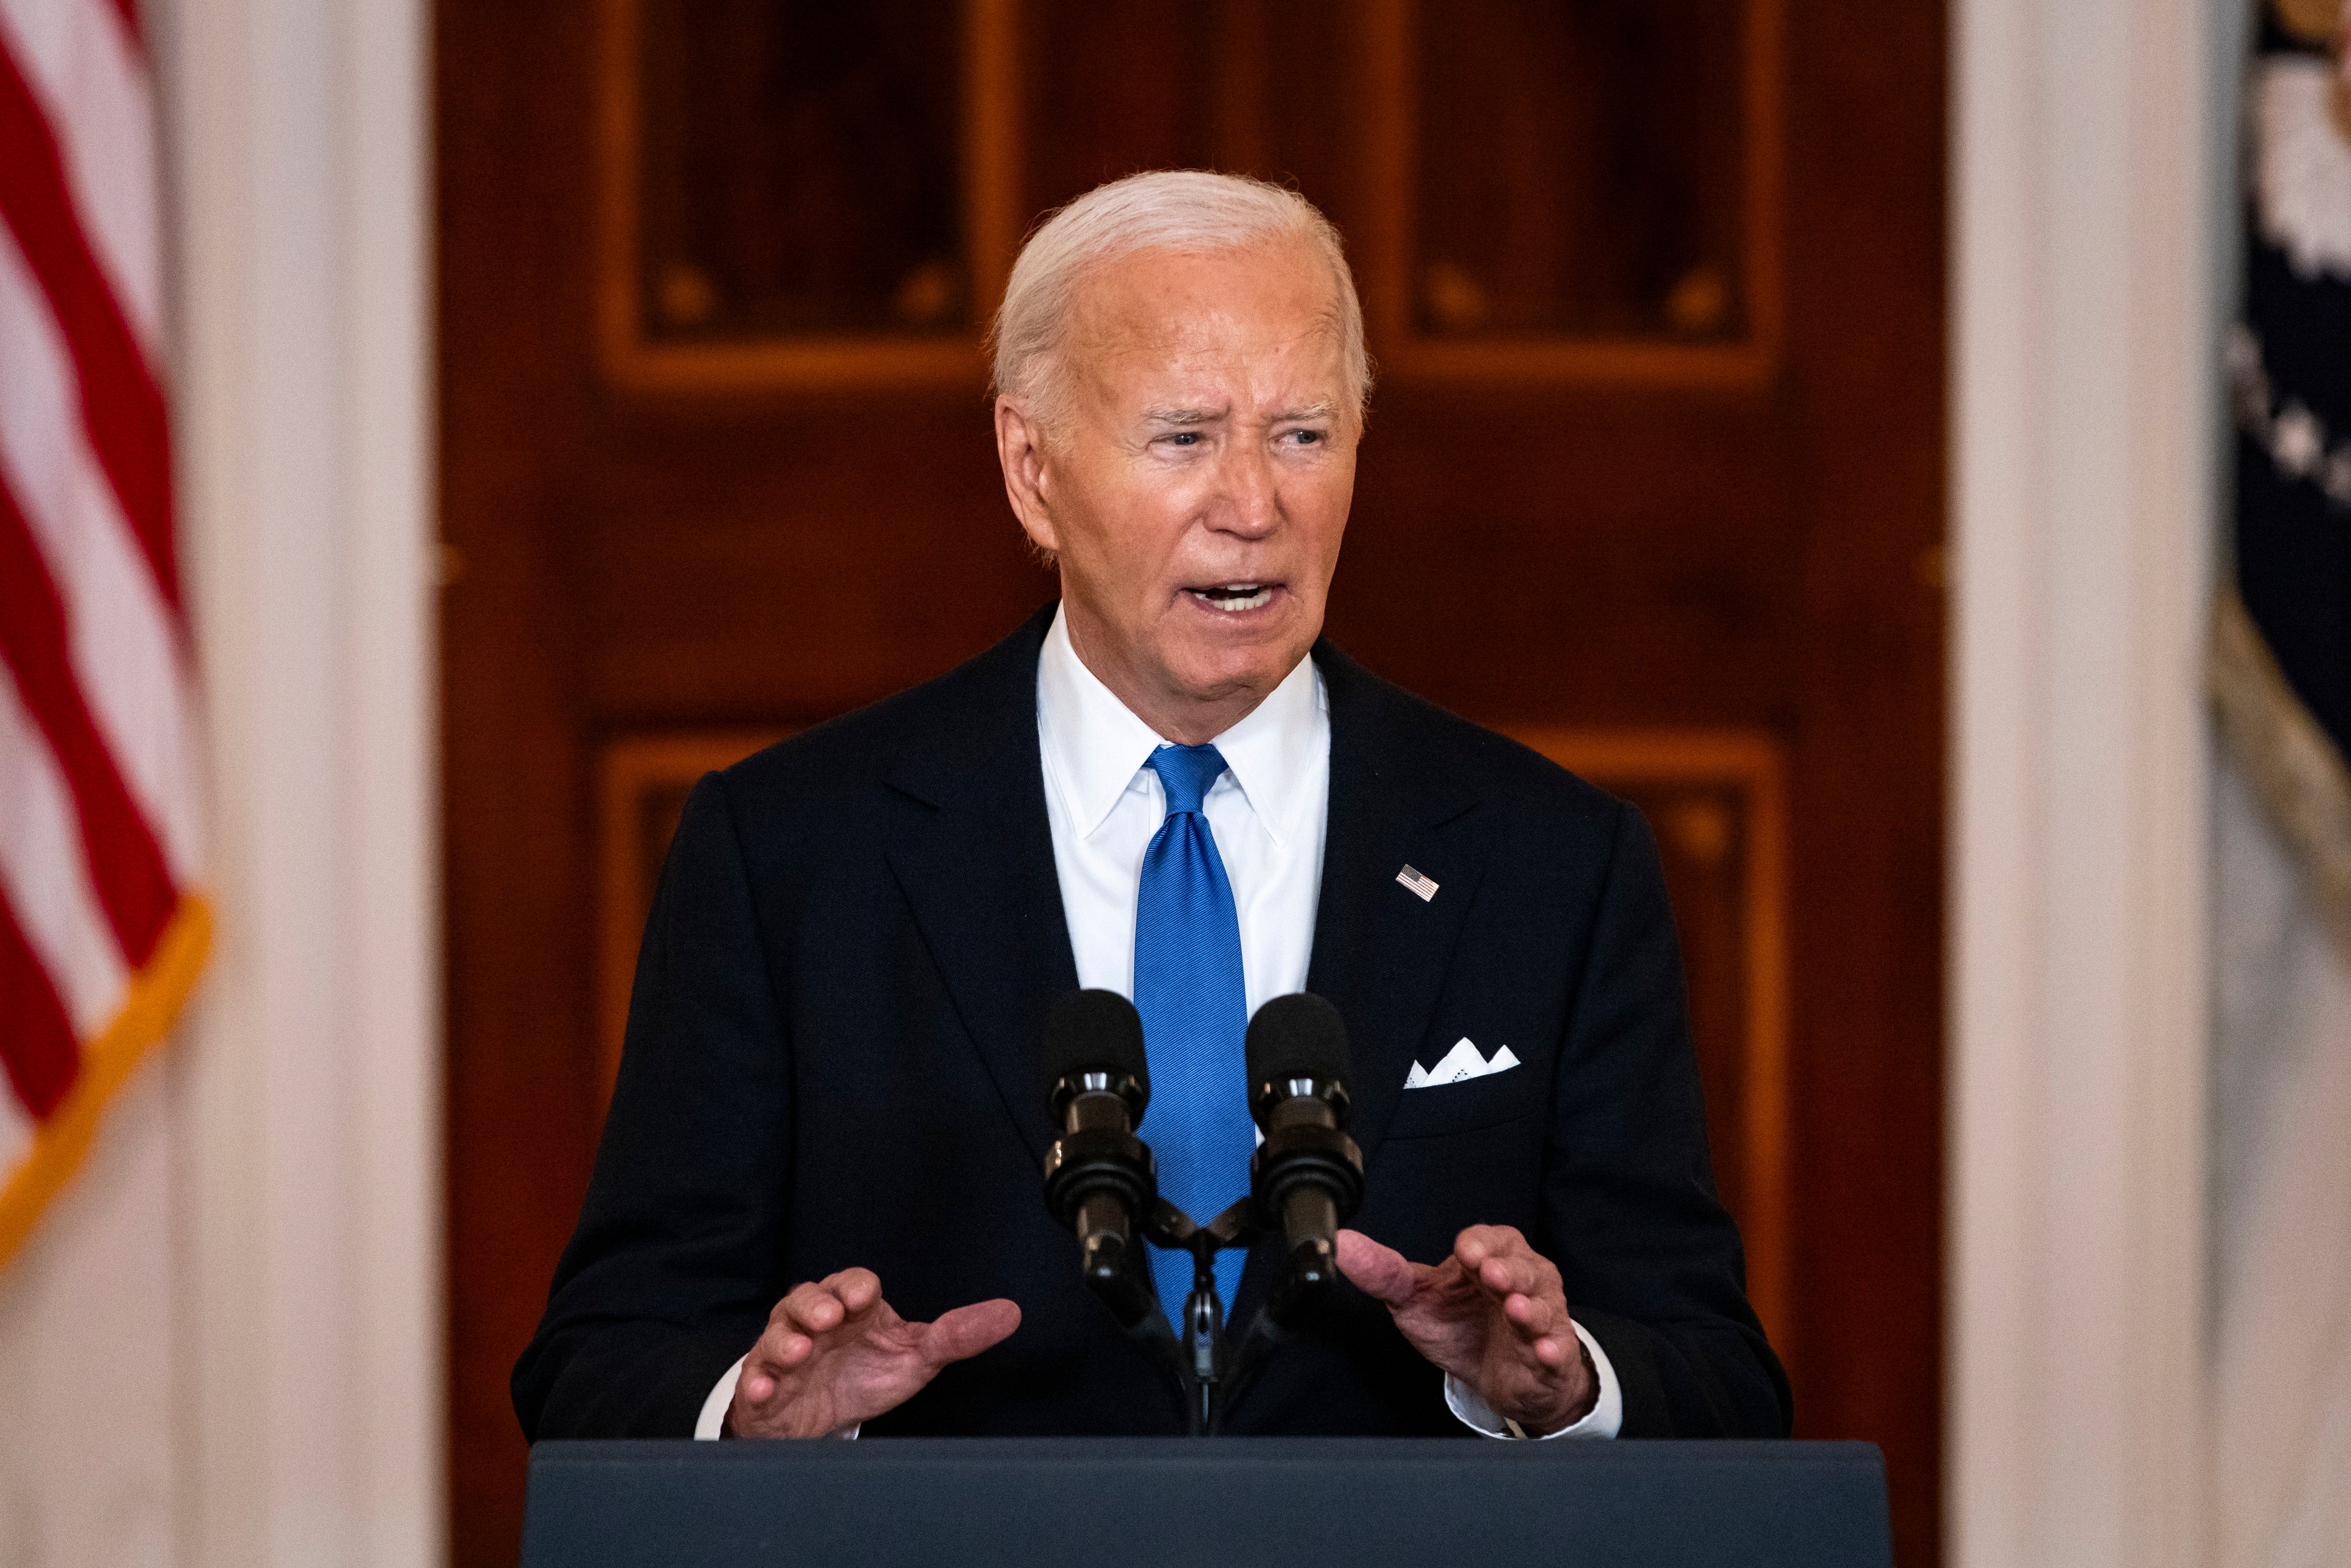 The Biden campaign tried to calm donors’ nerves during a Zoom call on Monday